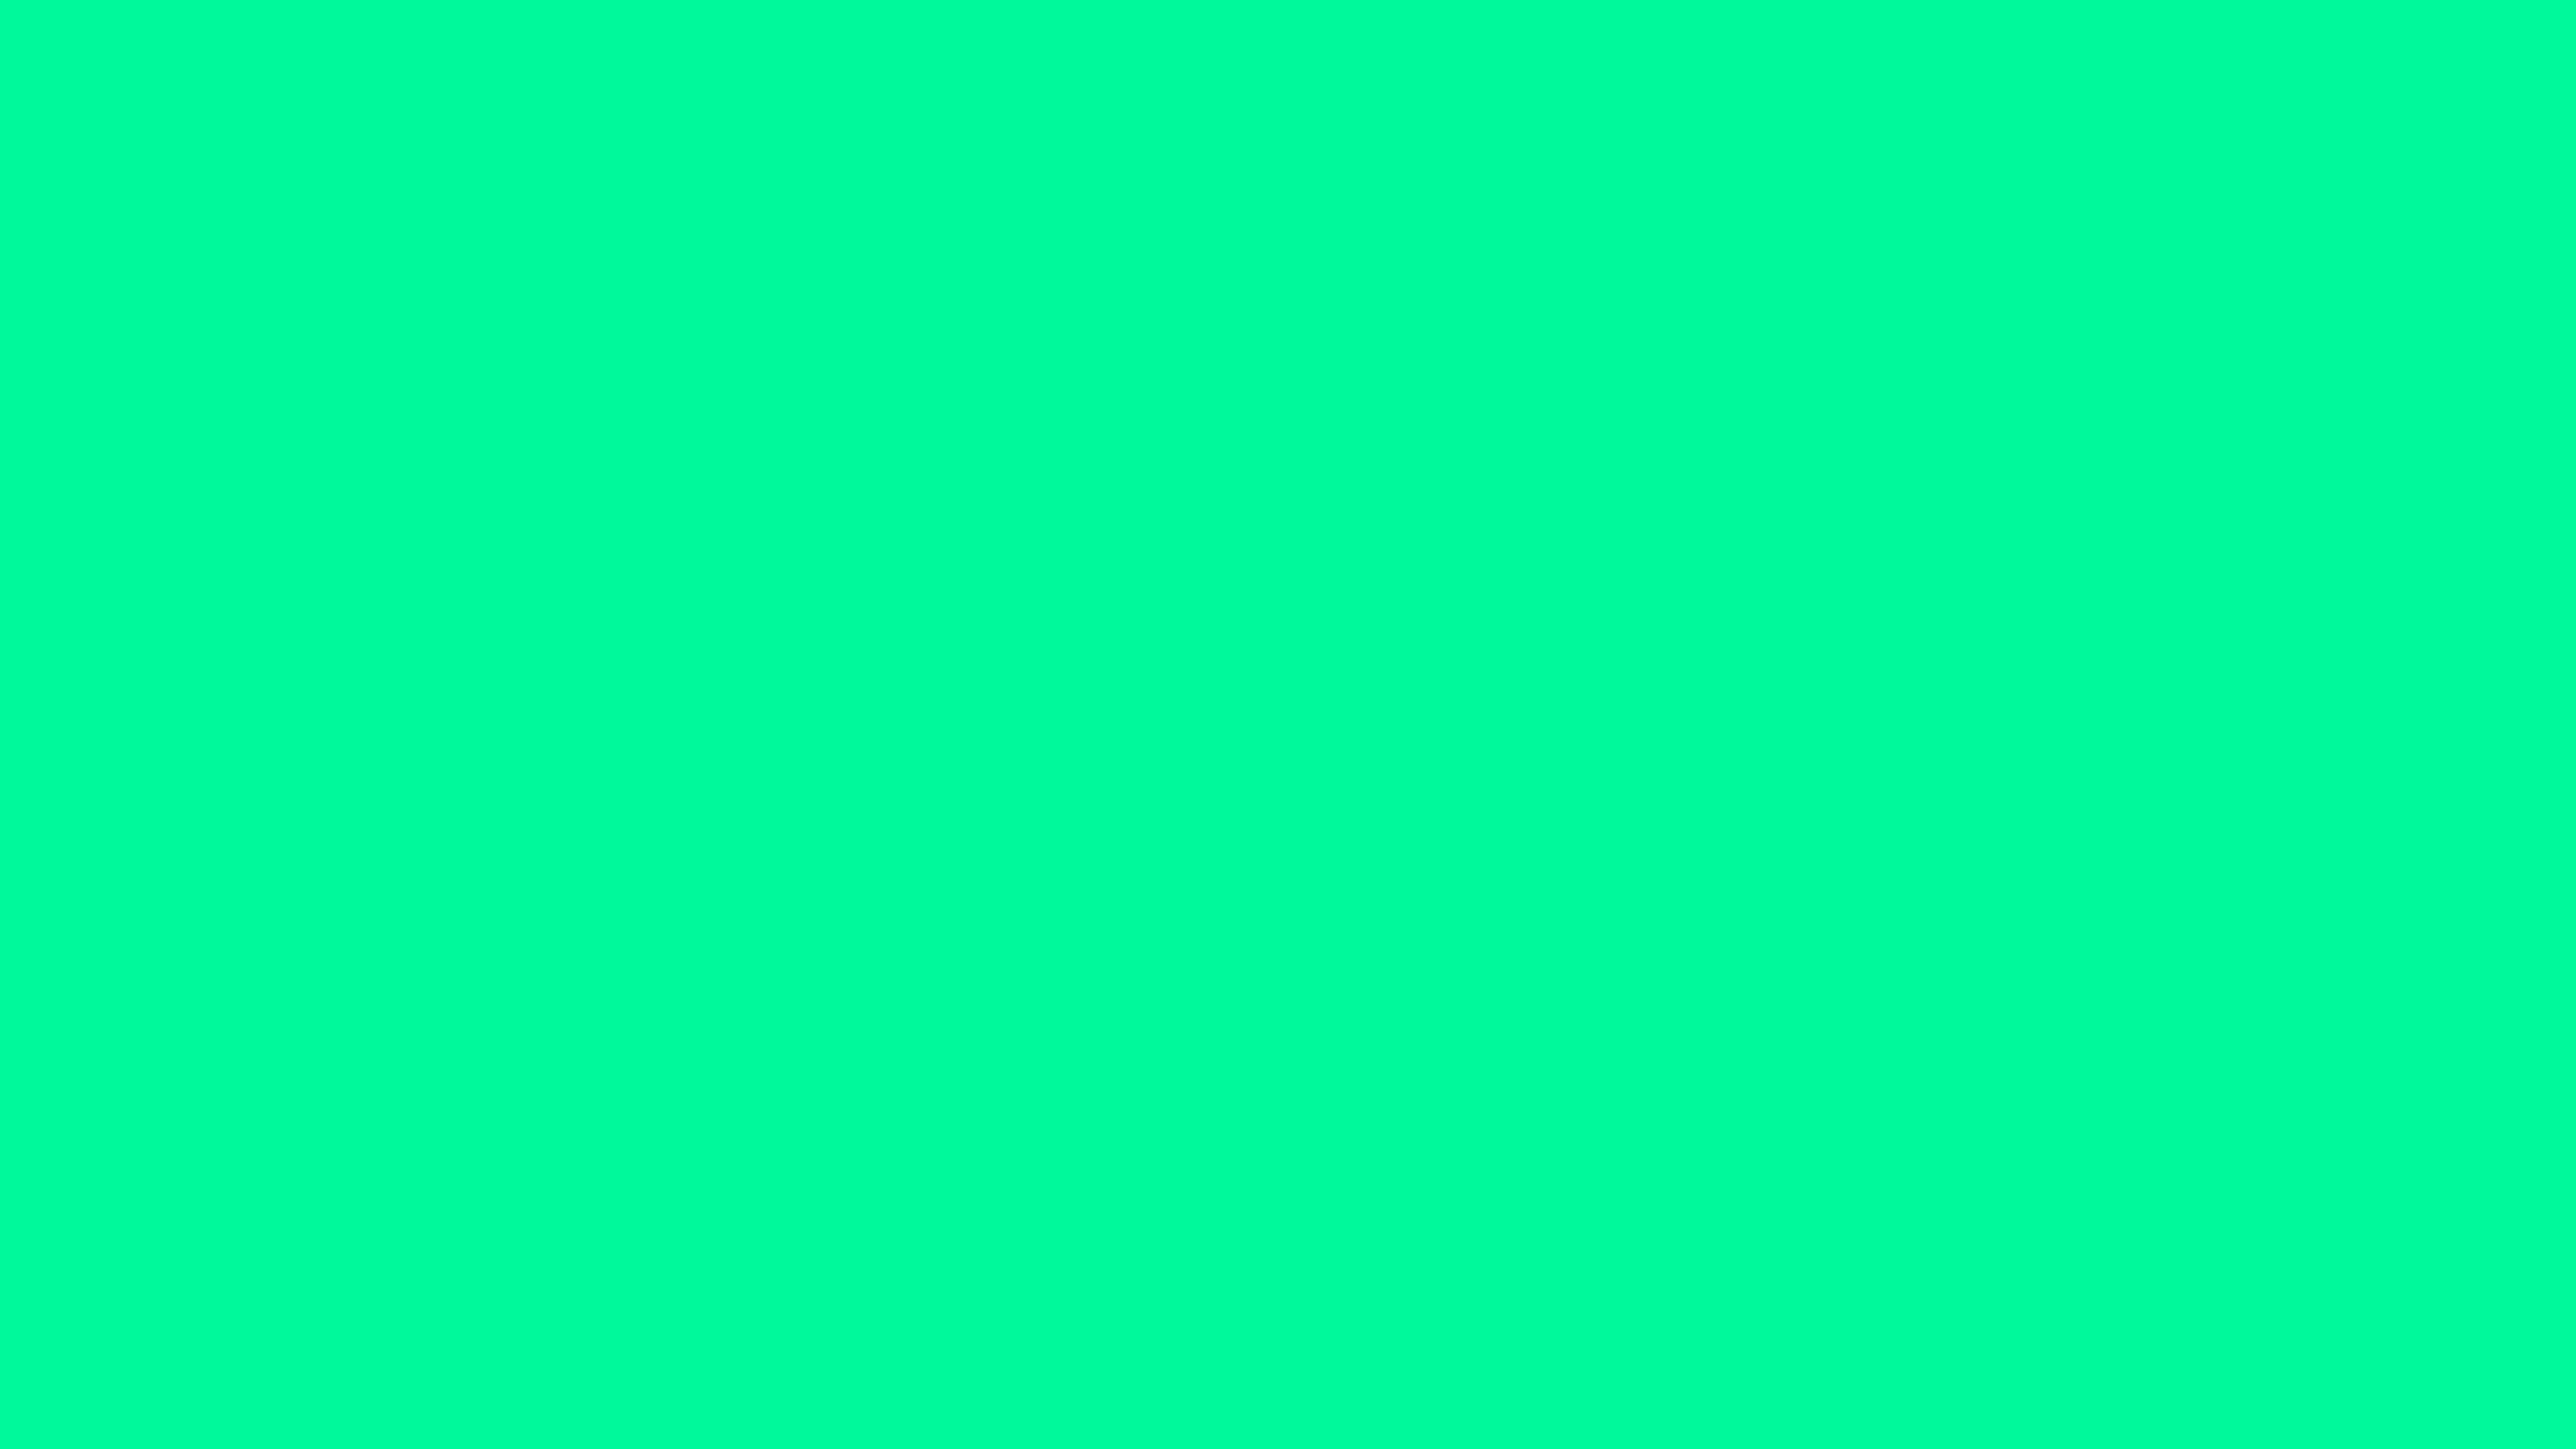 7680x4320 Medium Spring Green Solid Color Background